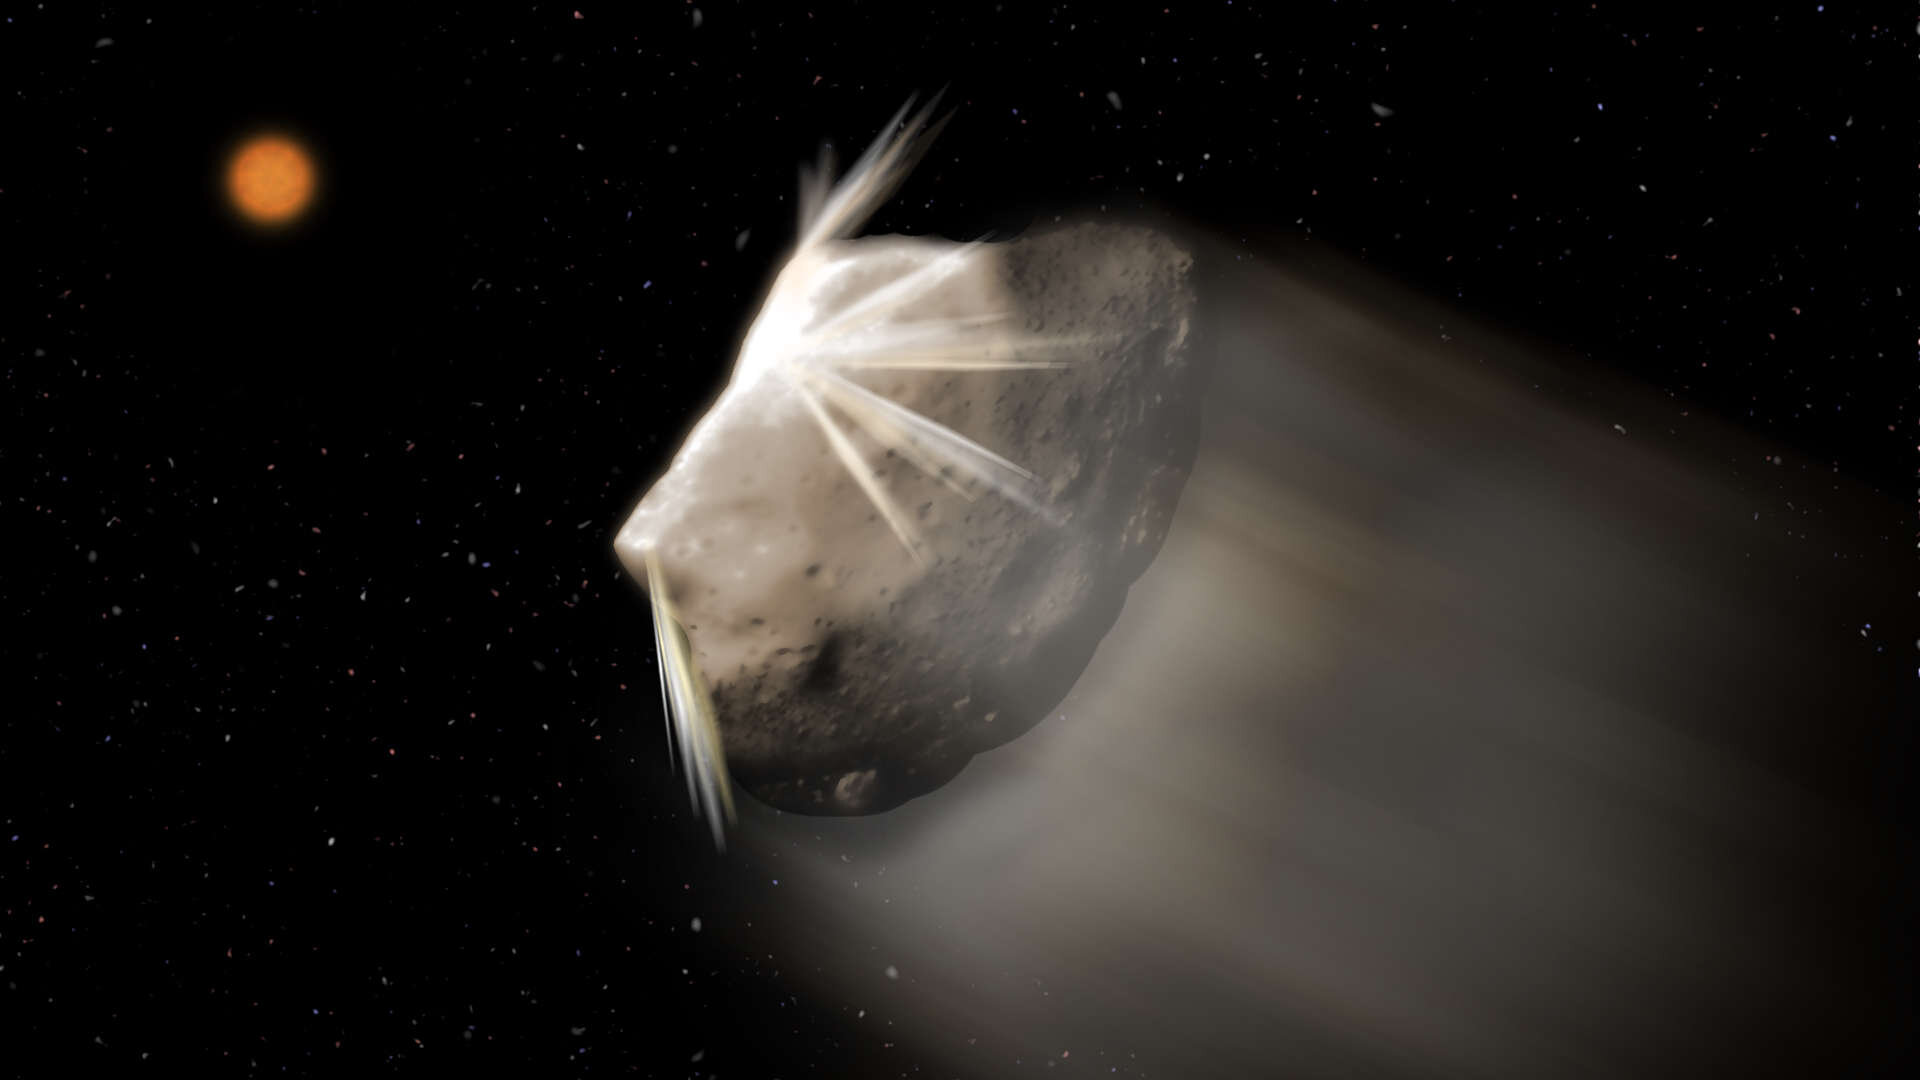 Centaurs gain comet-like properties through close encounters with Jupiter and Saturn